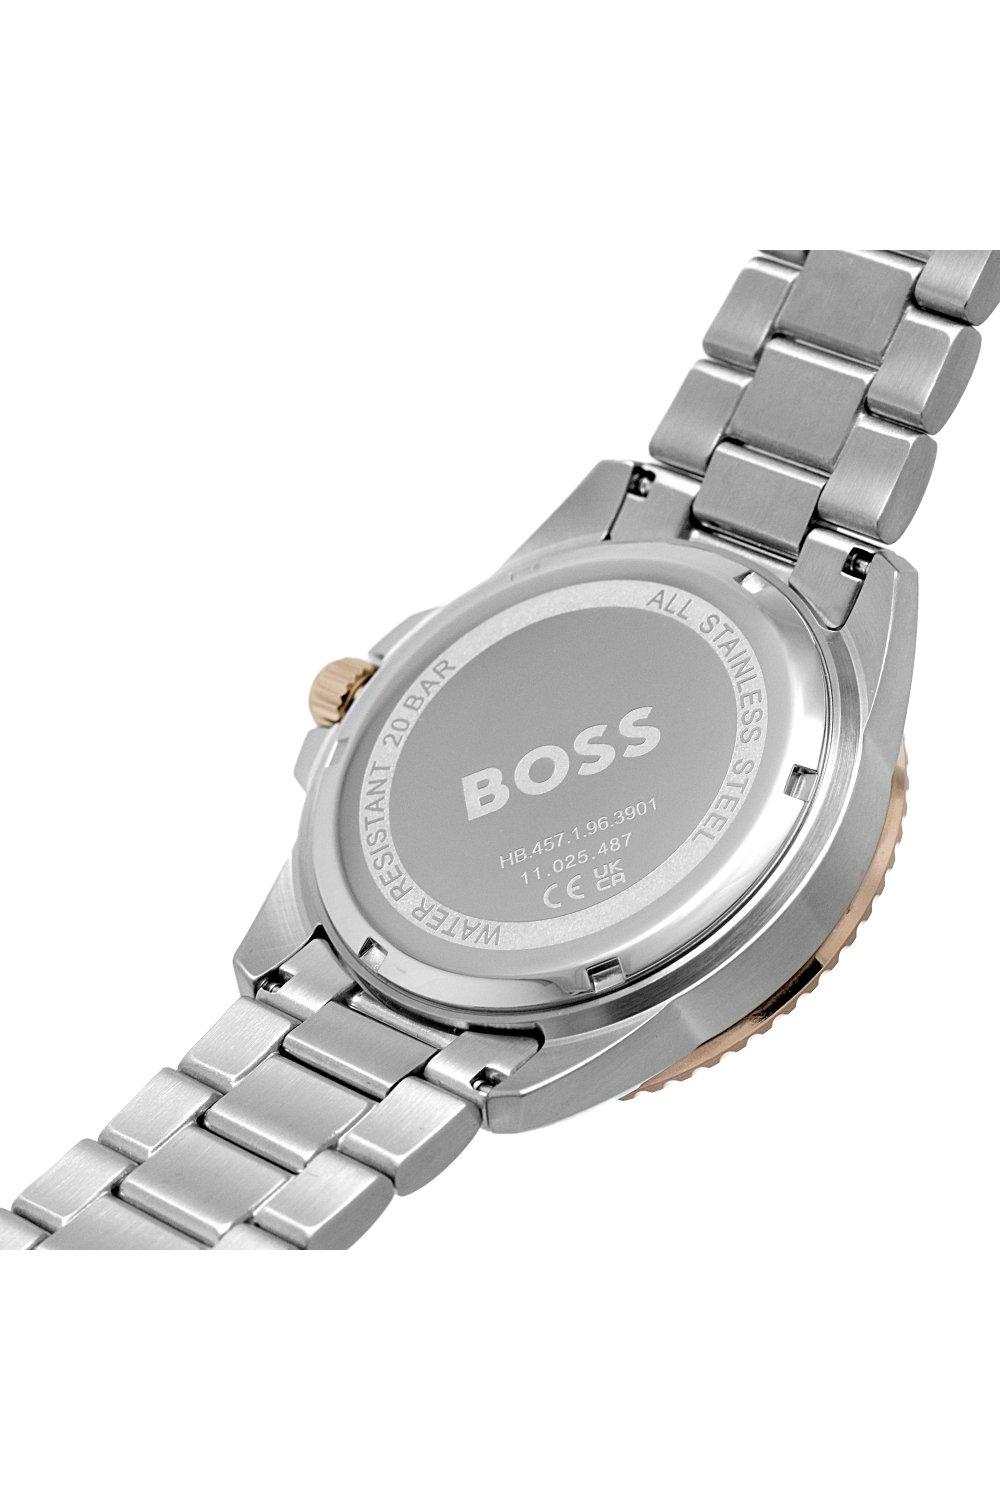 Watches | Ace Stainless Steel Fashion Analogue Quartz Watch - 1514012 | BOSS